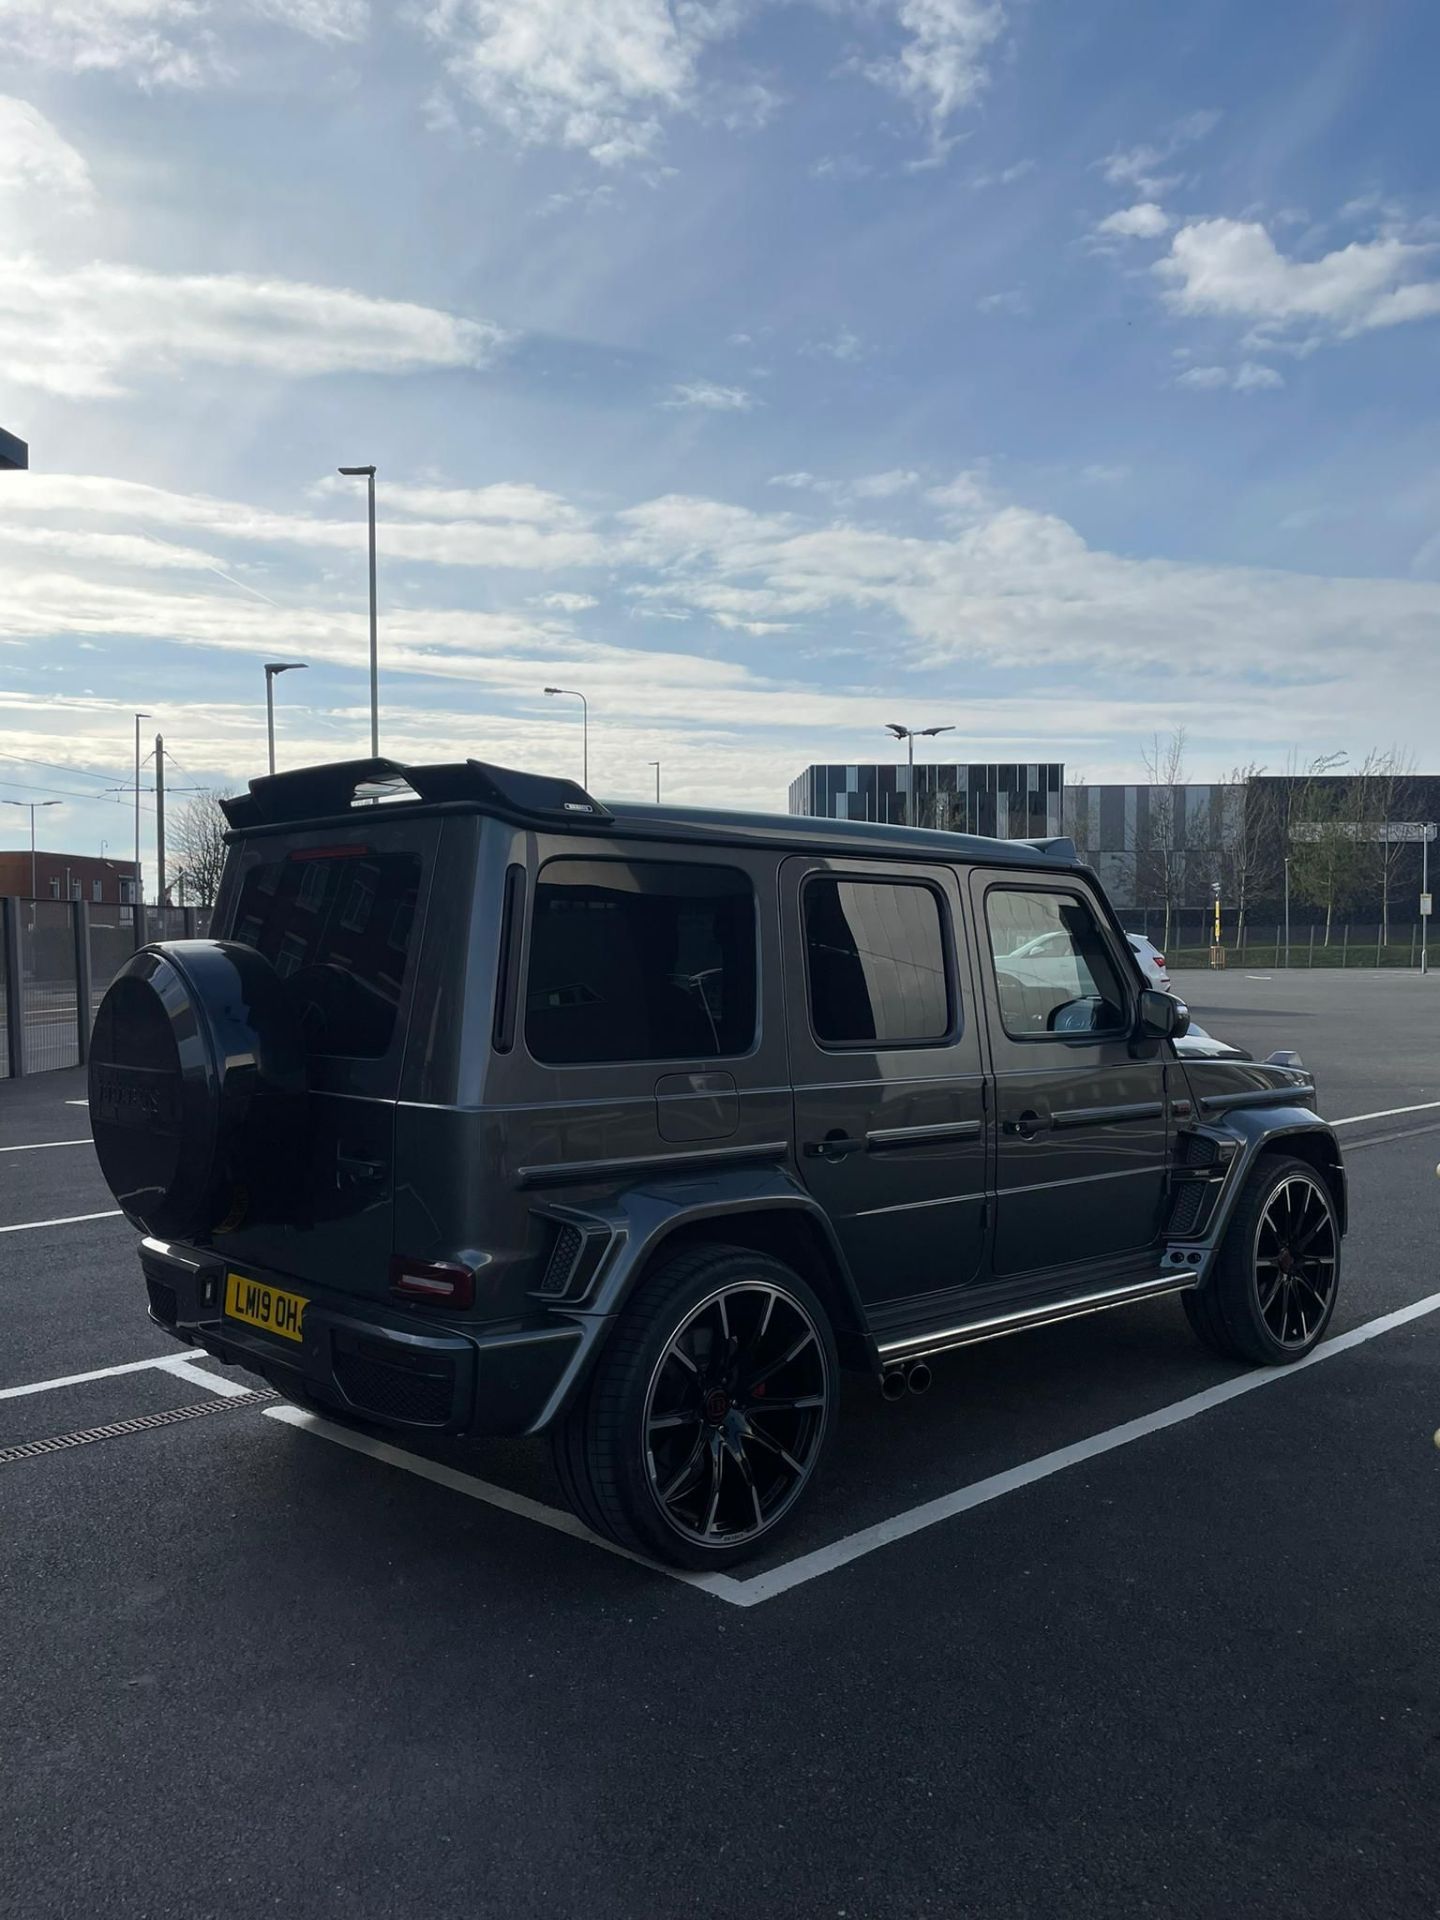 MERCEDES G63 BRABUS WIDE-STAR 800 STYLING GREY WITH BLACK LEATHER INTERIOR - Image 13 of 23